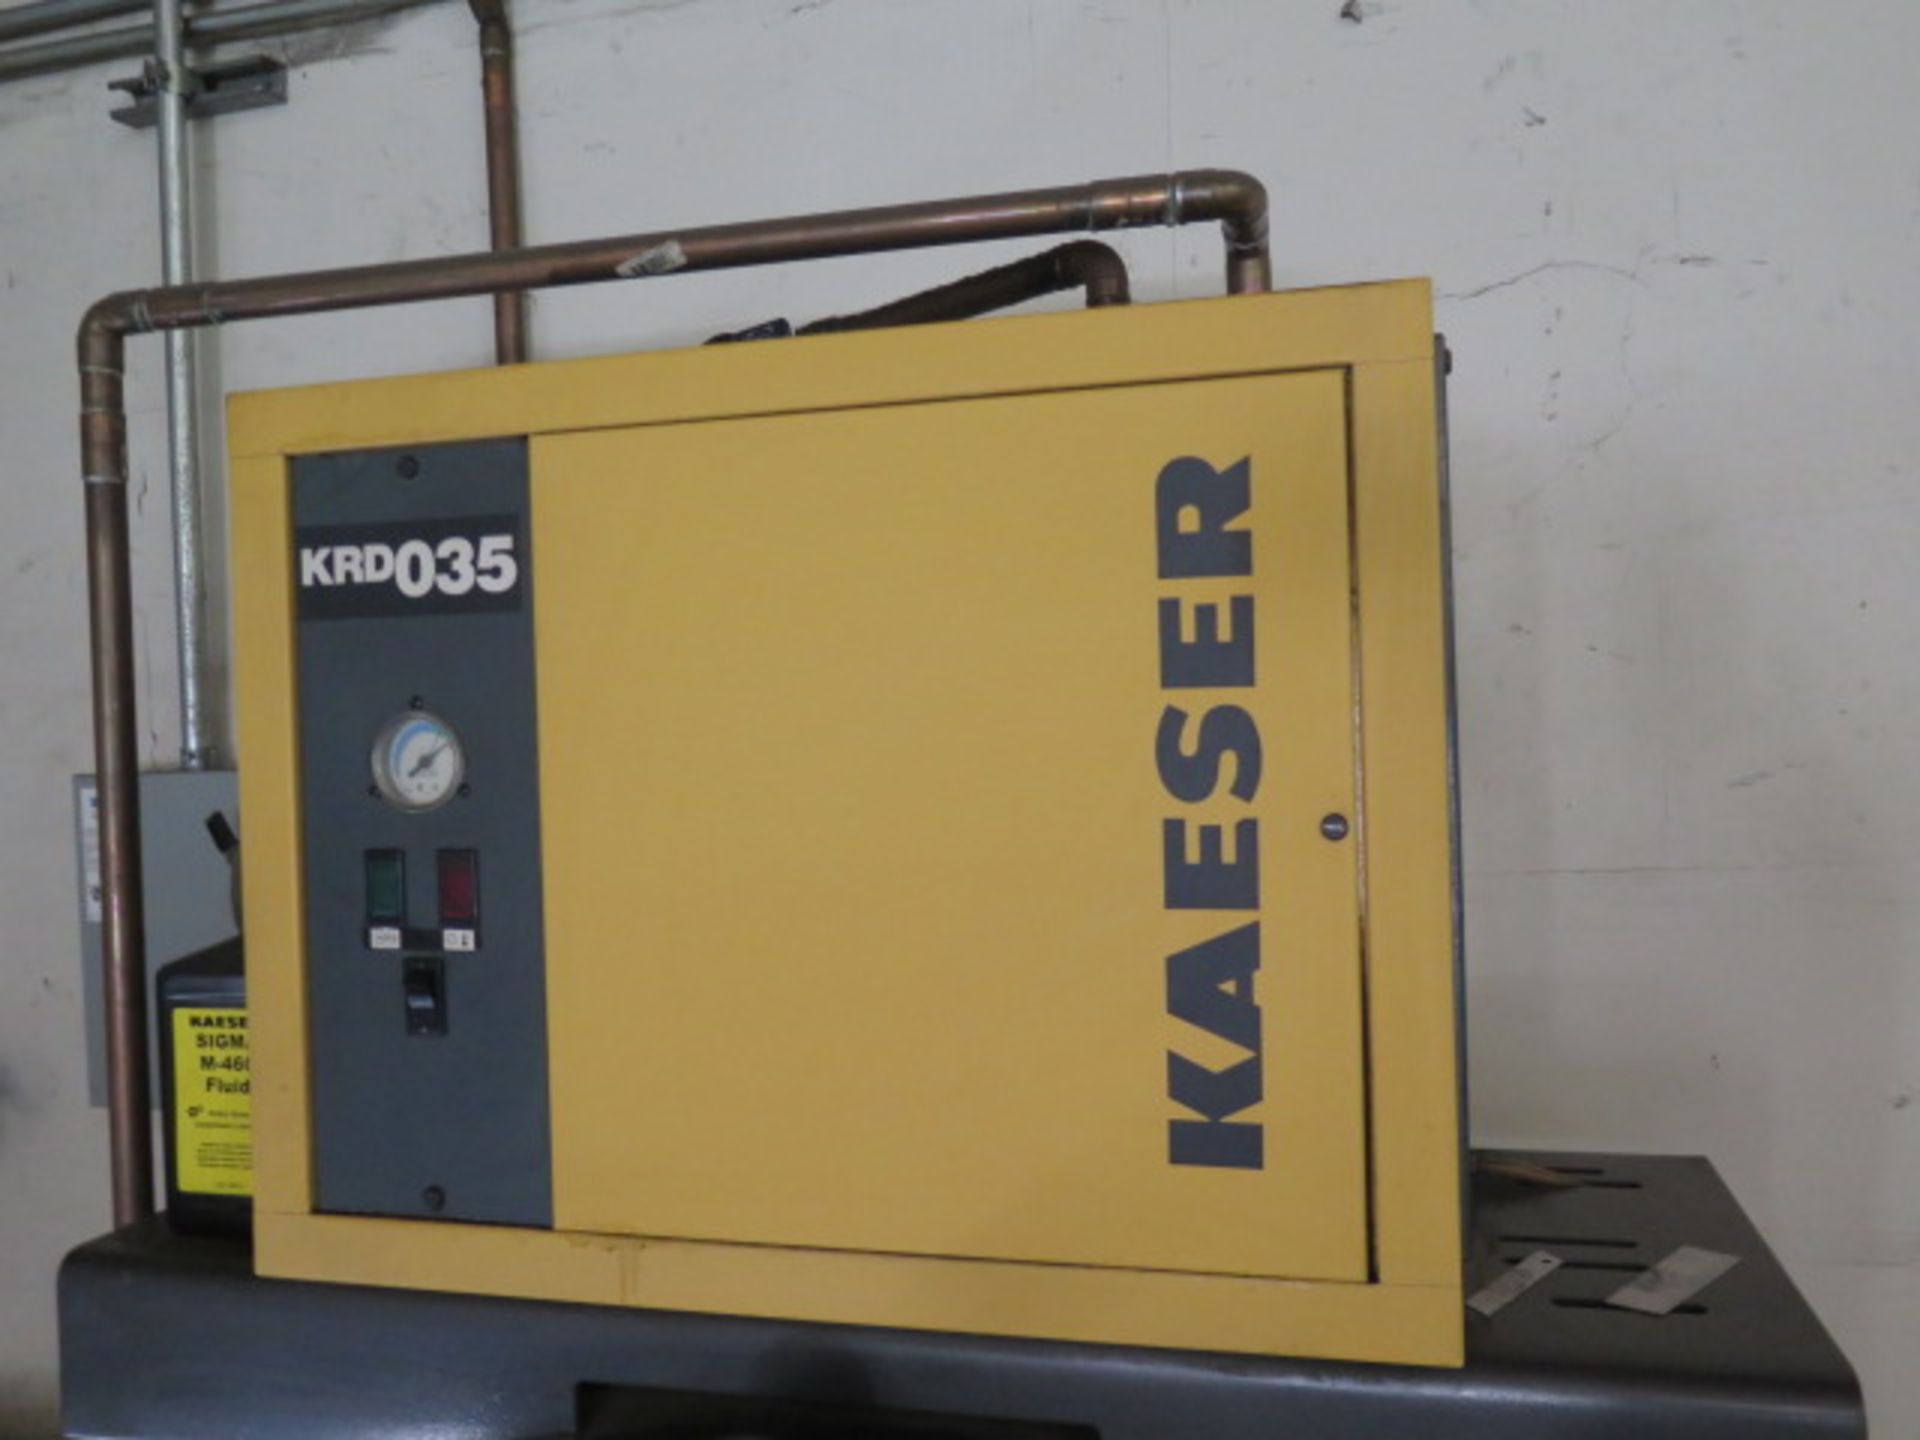 2006 Kaeser SM11 10Hp Rotary Air Compressor s/n 1220 w/ Dig Controls, 42 CFM @ 110 PSIG31,SOLD AS IS - Image 12 of 15